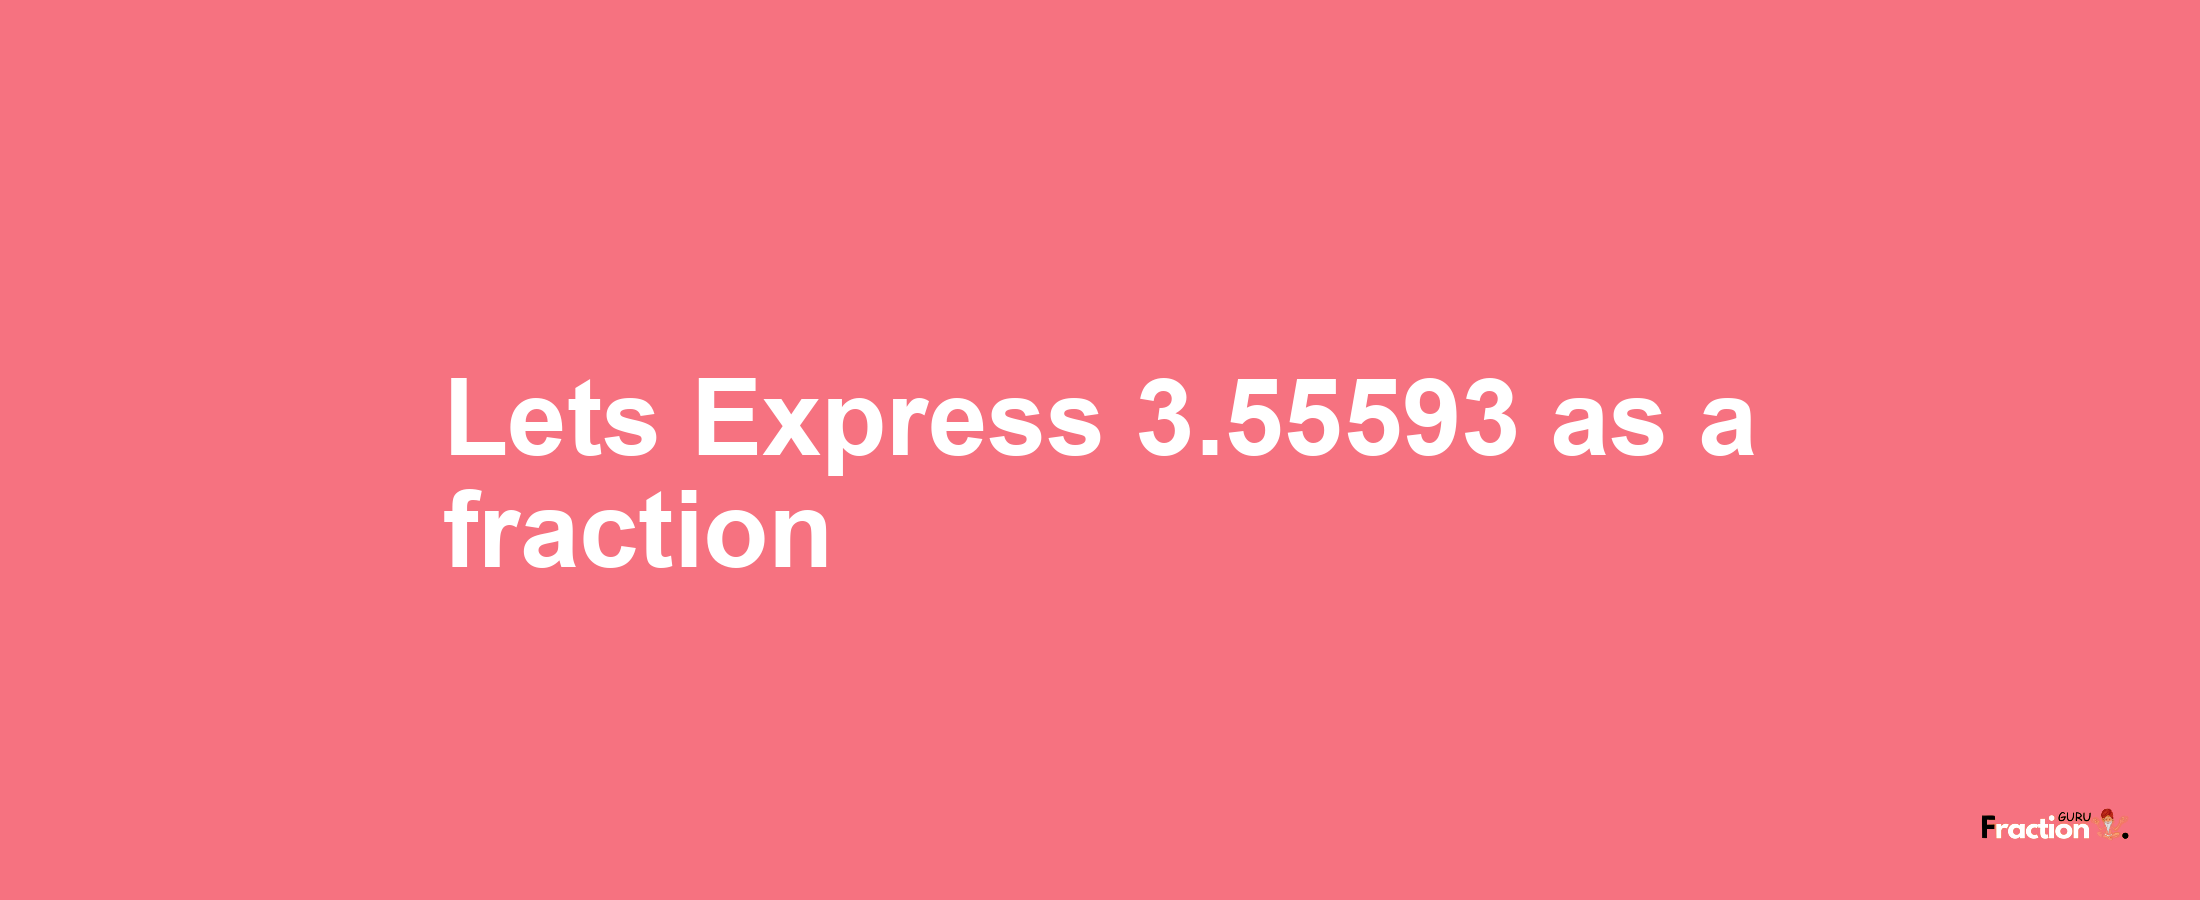 Lets Express 3.55593 as afraction